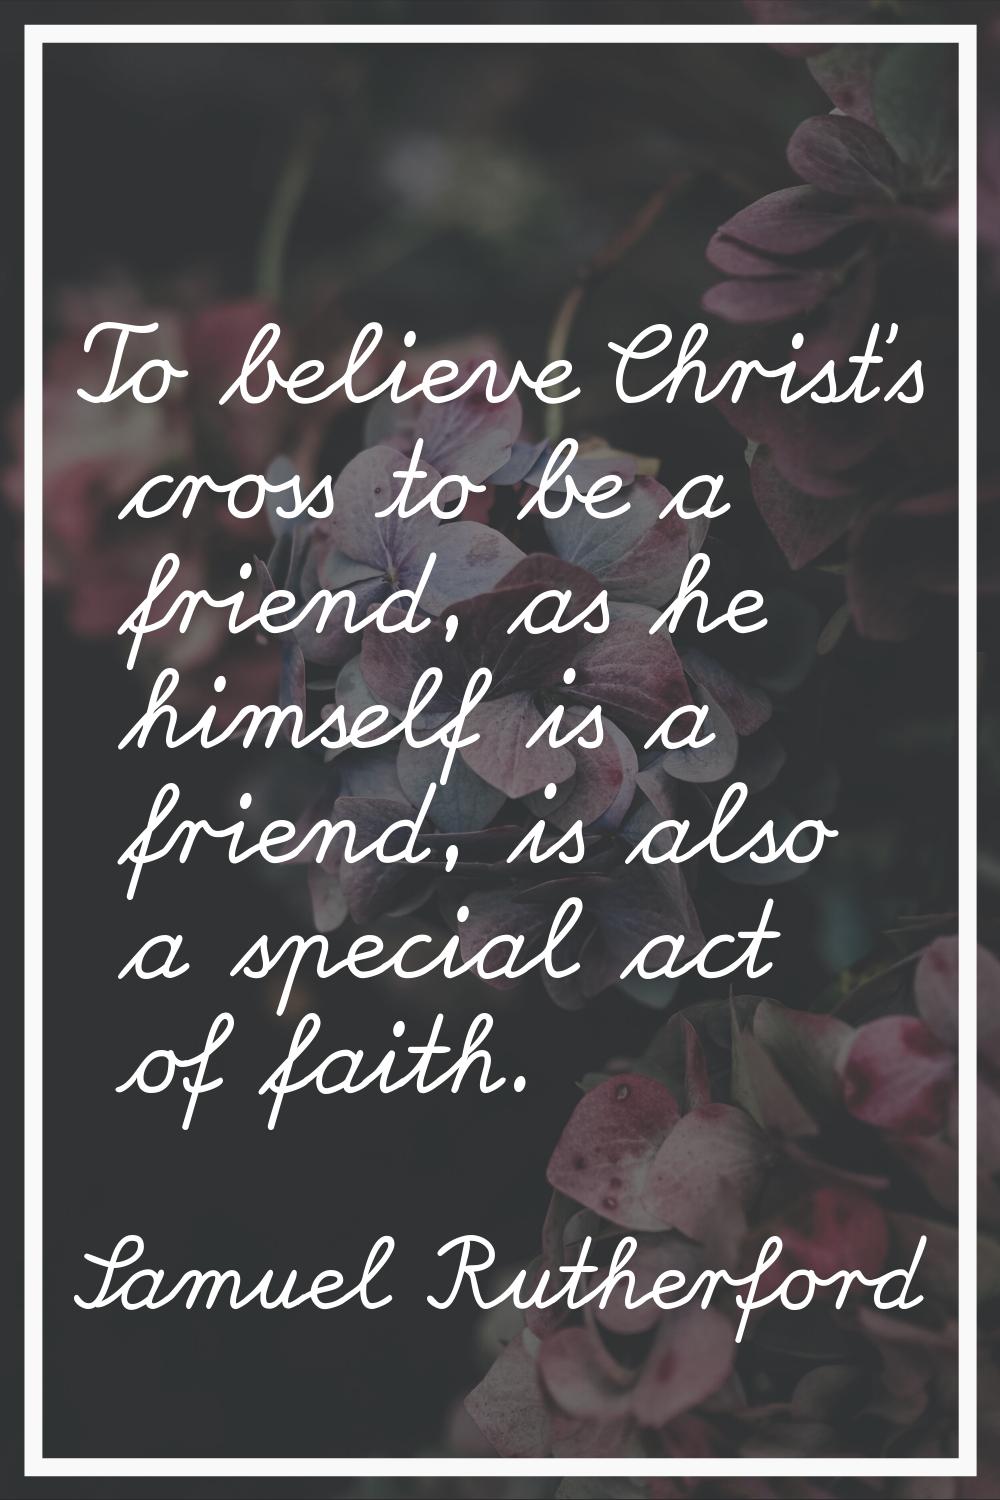 To believe Christ's cross to be a friend, as he himself is a friend, is also a special act of faith